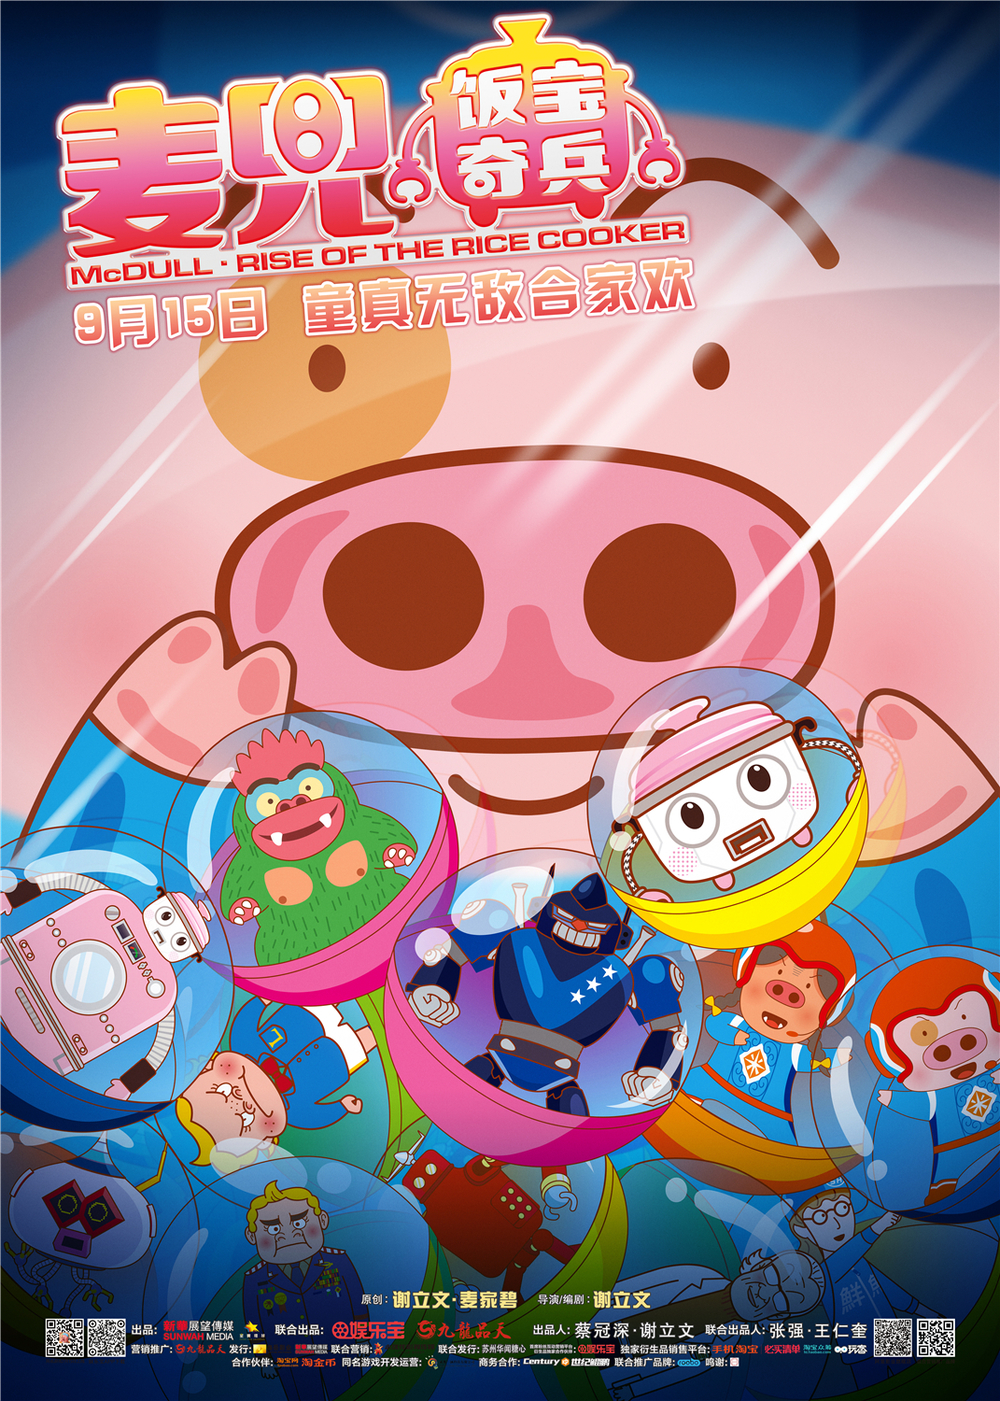 affiche du film McDull: Rise of the Rice Cooker